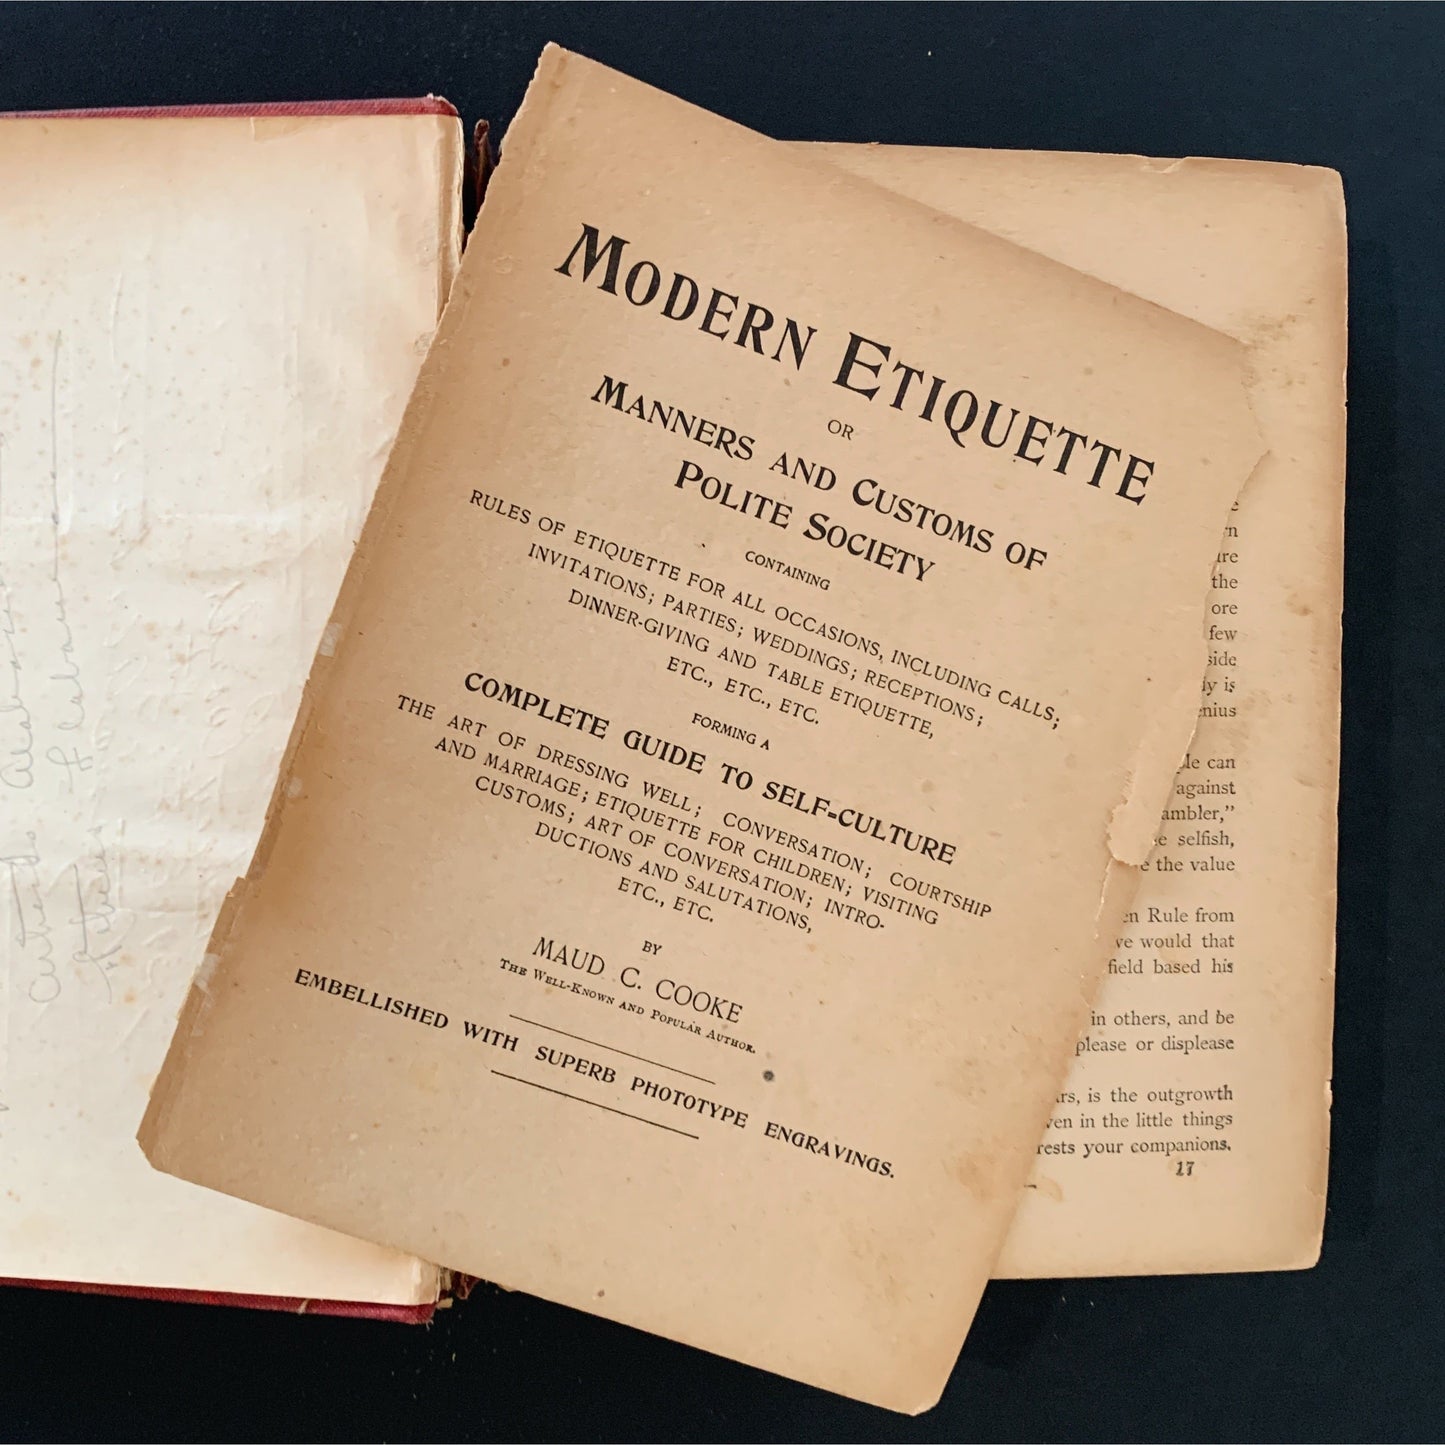 Modern Etiquette or Manners and Customs of Polite Society, 1906